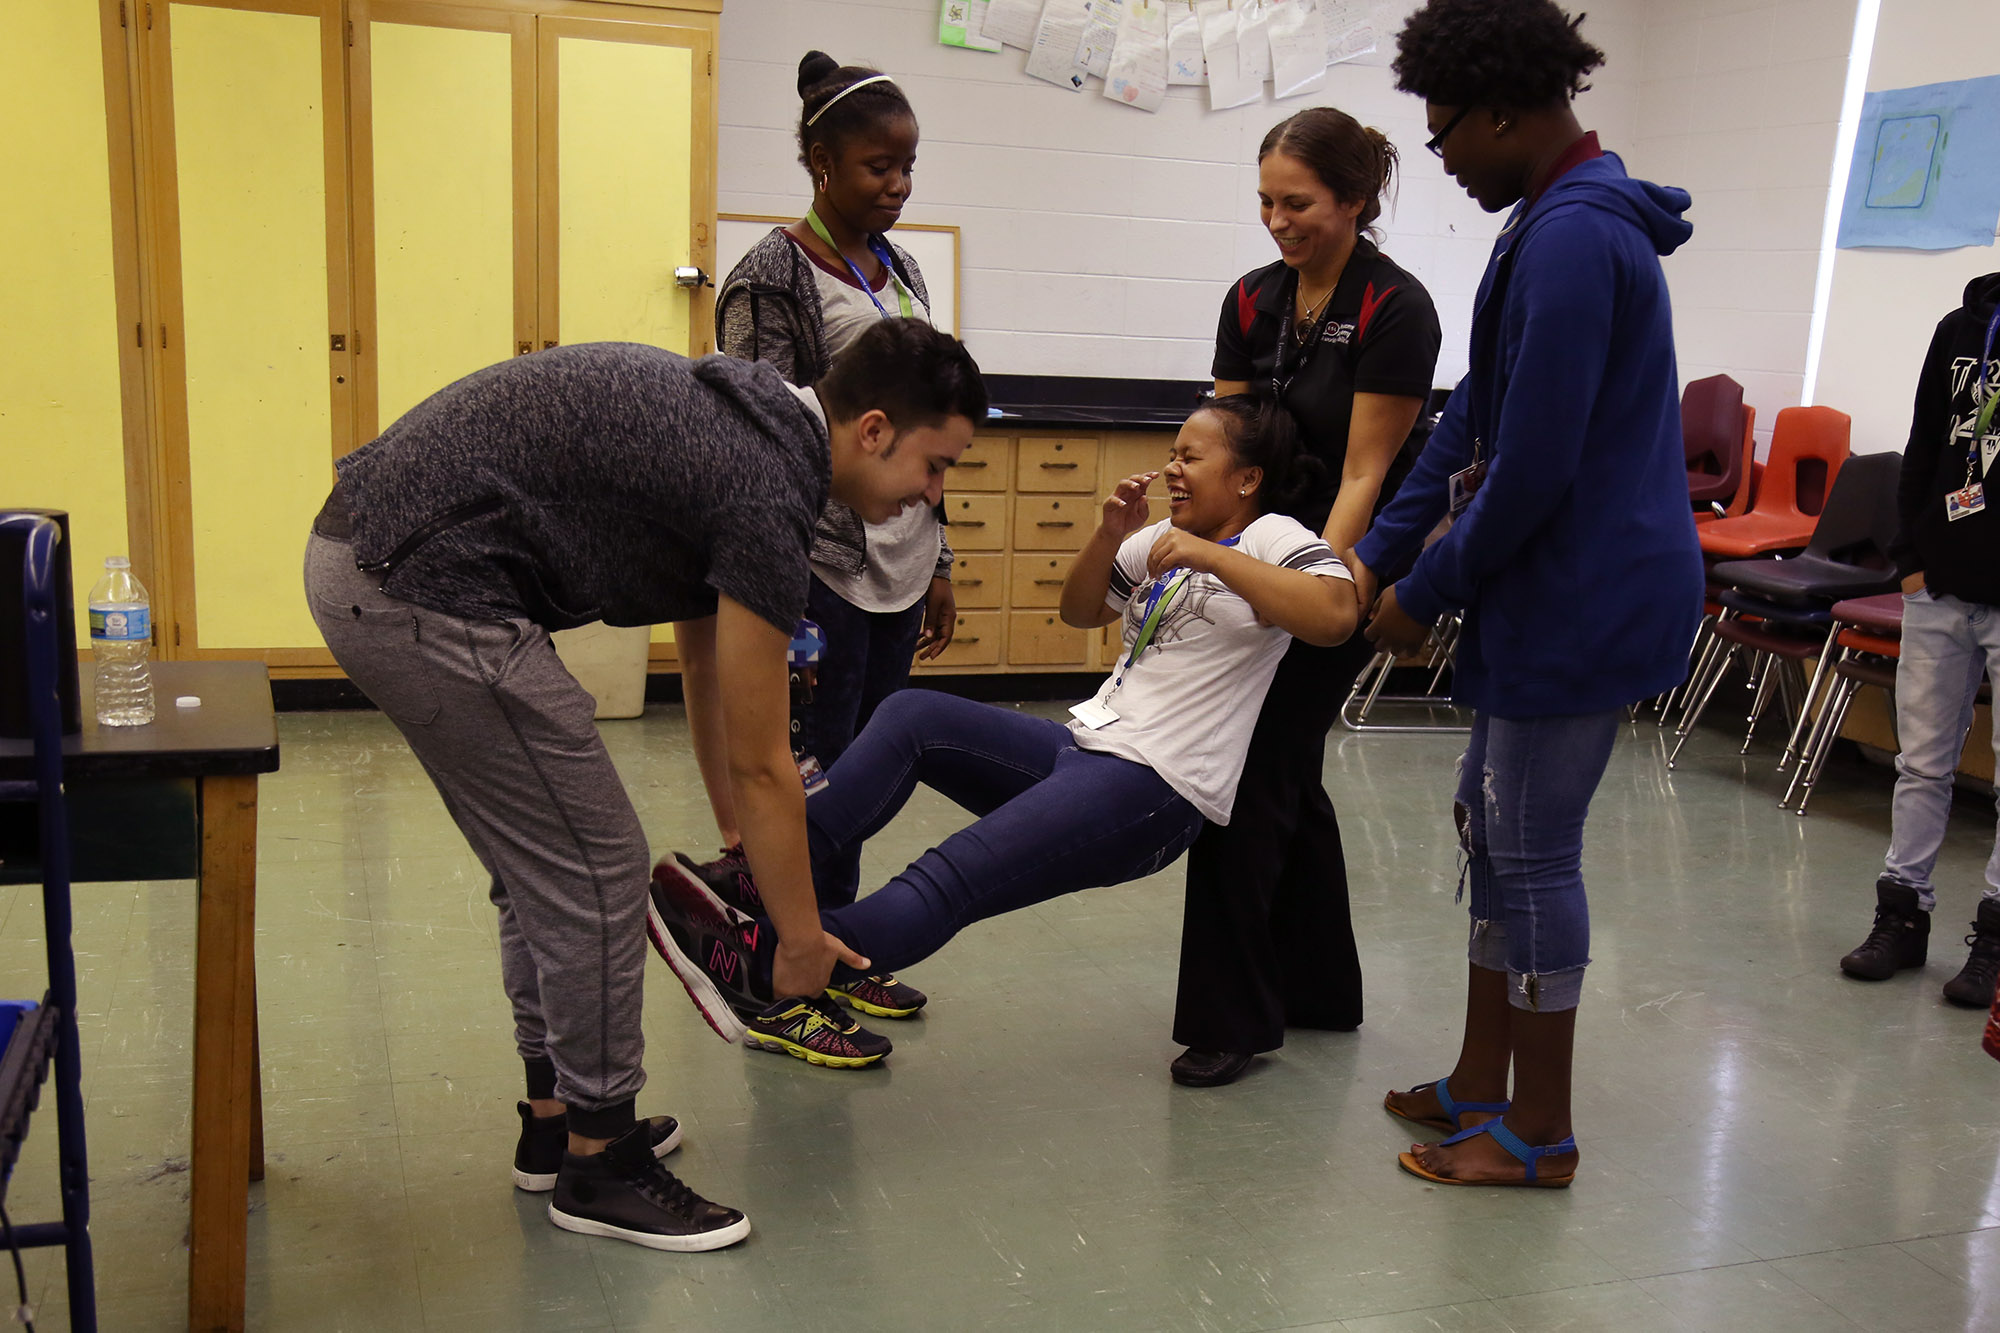  Students at ESL Newcomer Academy work on making shapes with dance and theater organization, Pilobolus. 